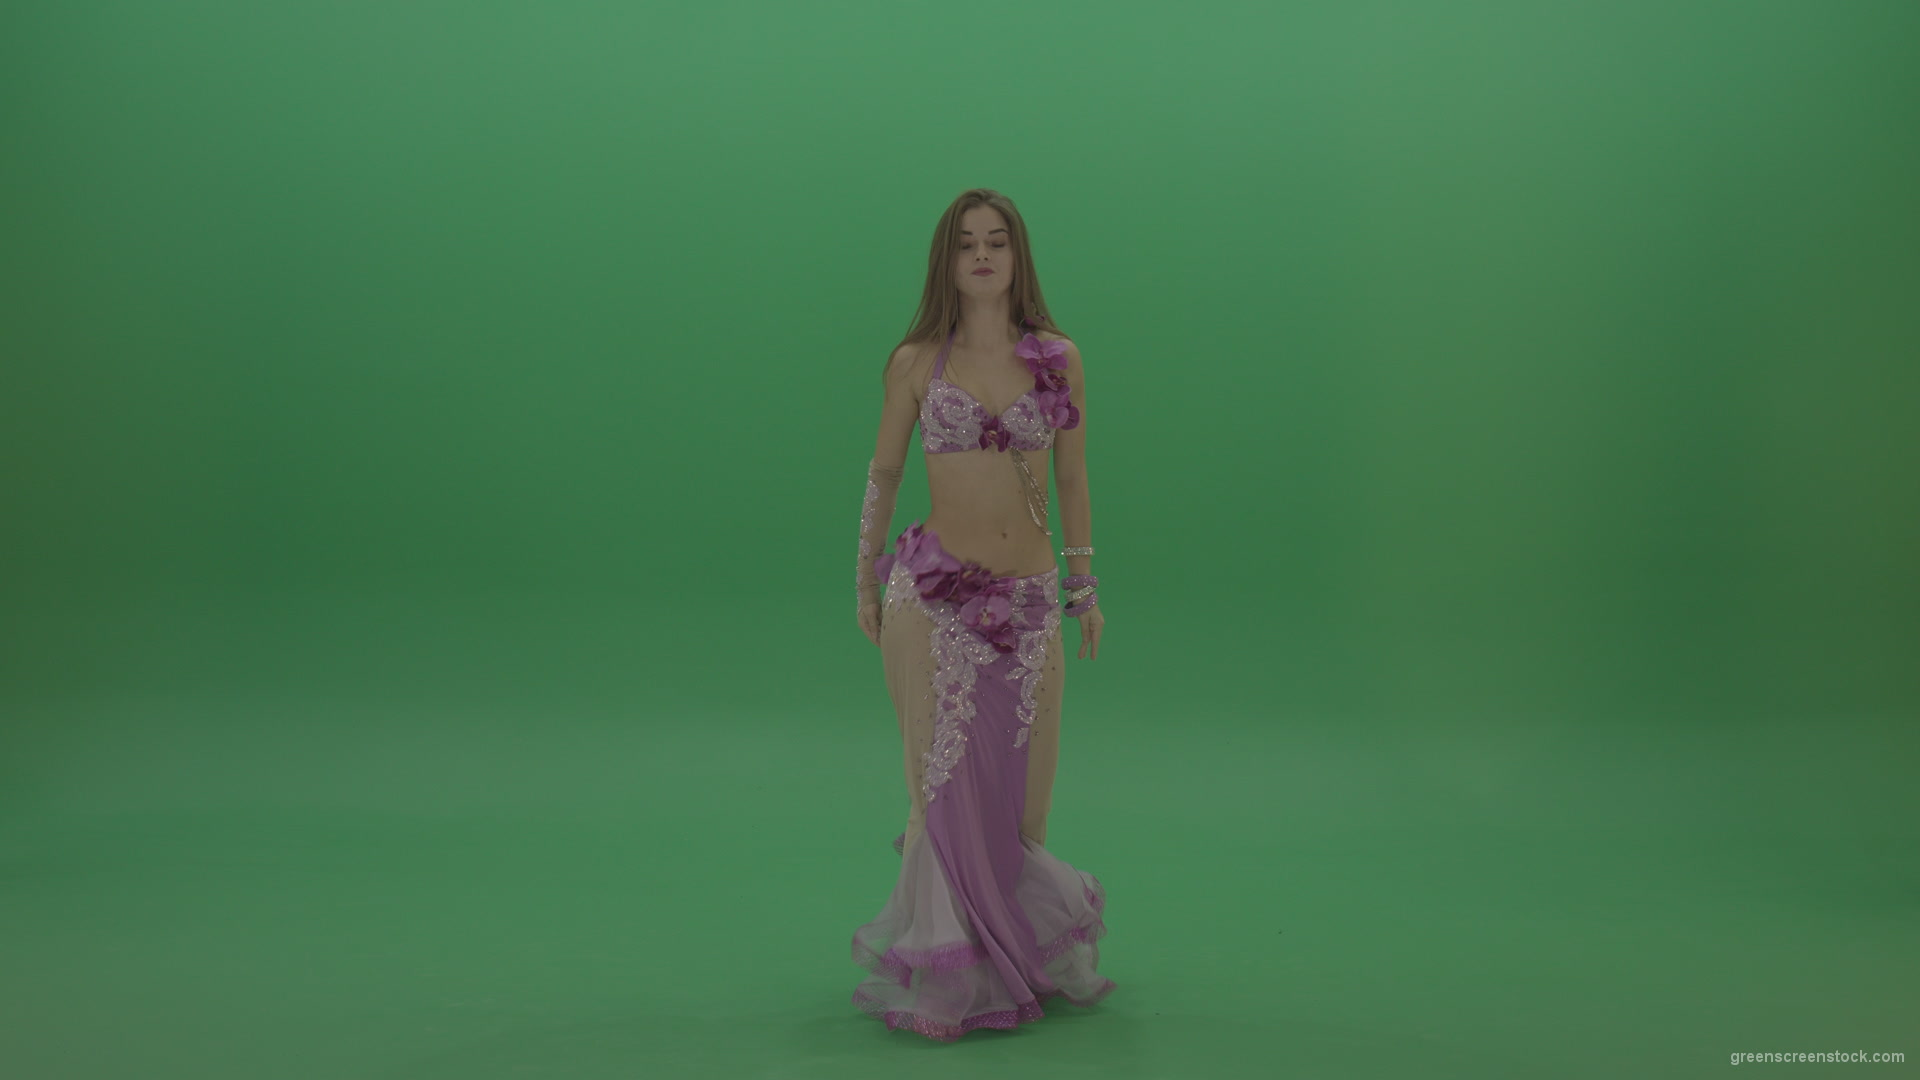 Delightful-belly-dancer-in-pink-wear-display-amazing-dance-moves-over-chromakey-background_007 Green Screen Stock